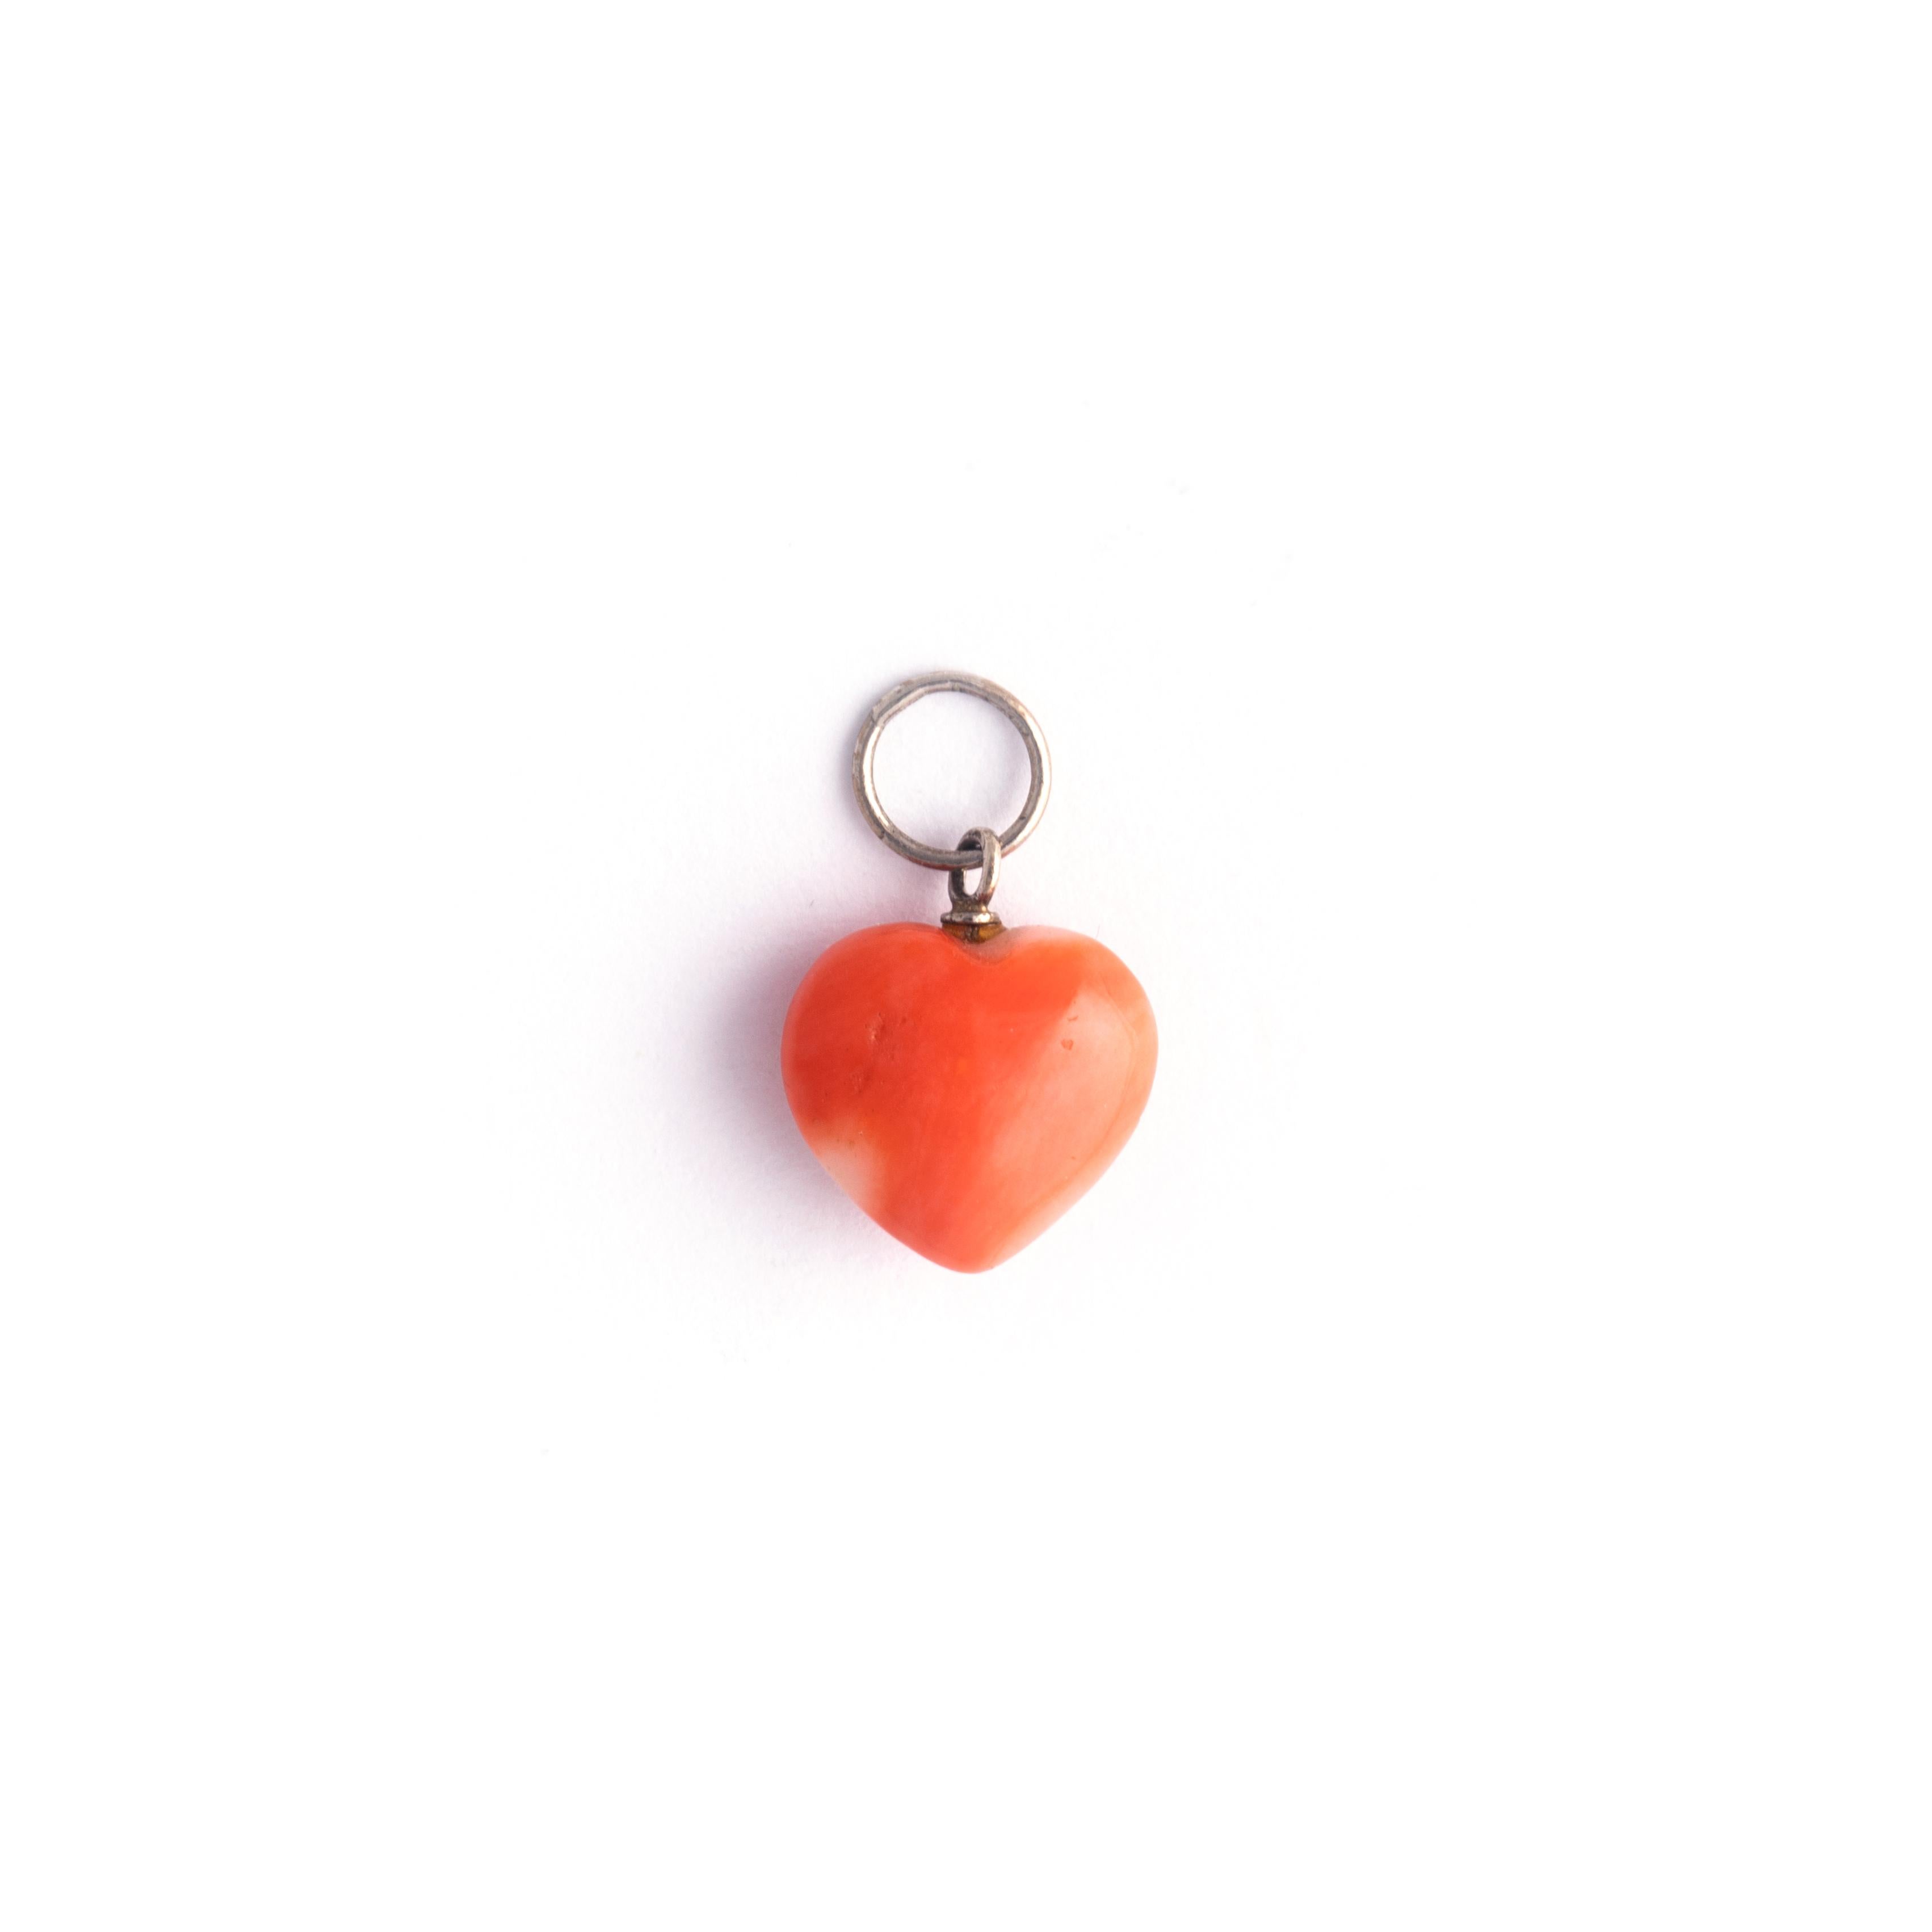 Antique Pendant Heart Shape Coral .
Total weight: 0.76 grams.
Total length: 1.50 centimeters including bail.